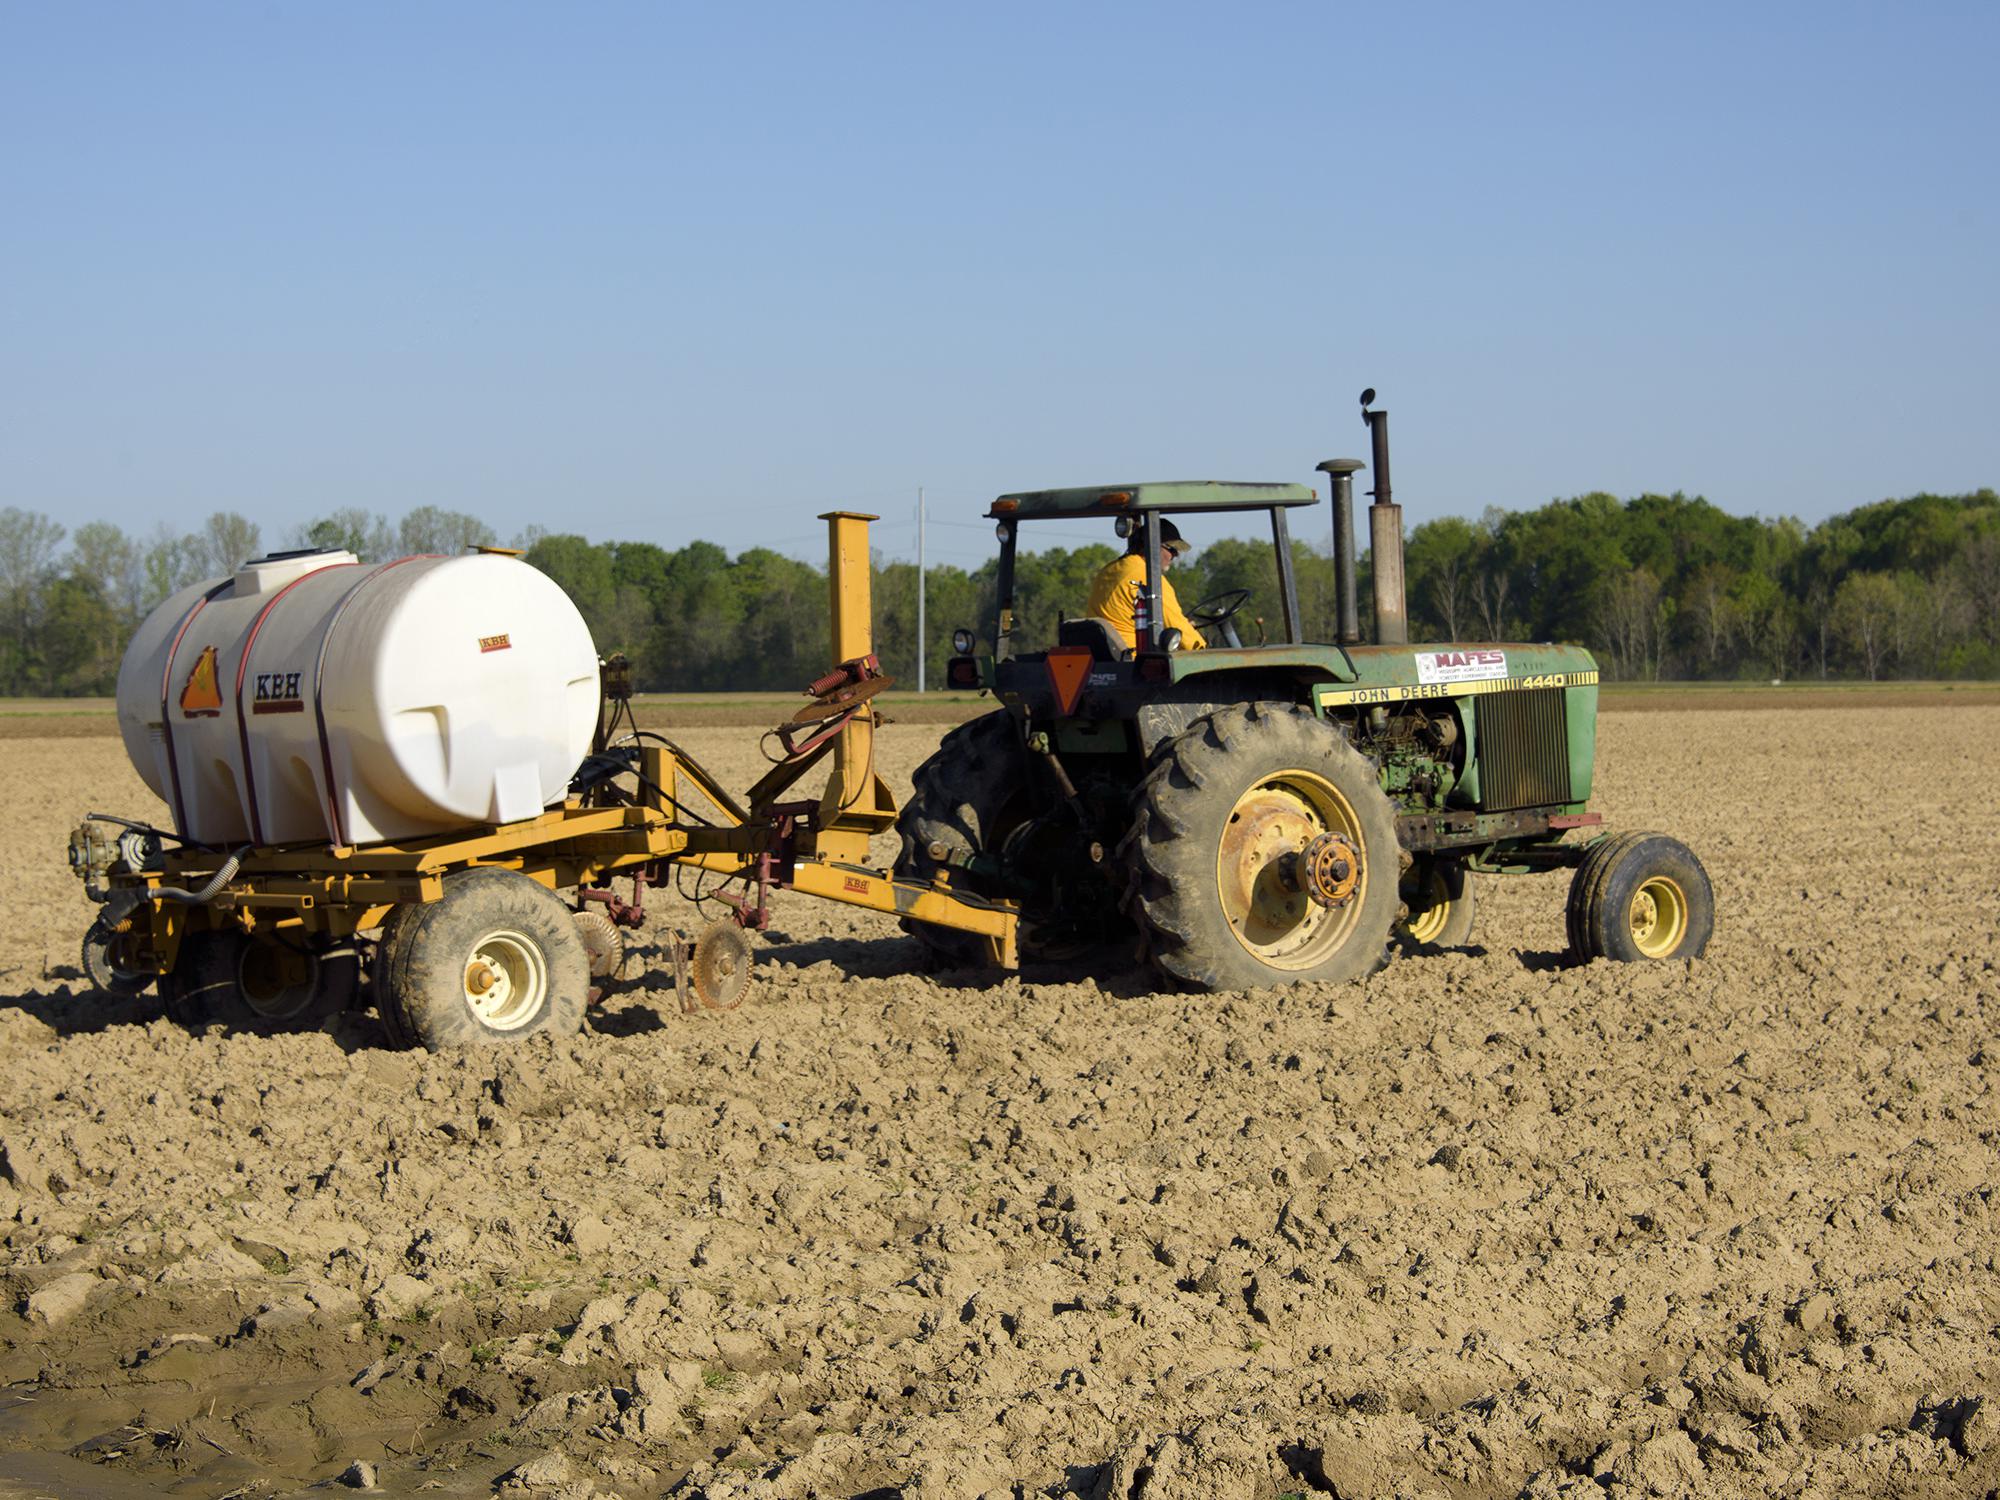 Eddie Stevens, farm supervisor at Mississippi State University’s R. R. Foil Plant Science Research Center in Starkville, was applying a liquid fertilizer to a corn field on April 5, 2016. Correct application of nutrients is a key part of environmental stewardship and efficient farm management. (Photo by MSU Extension Service/Kevin Hudson)